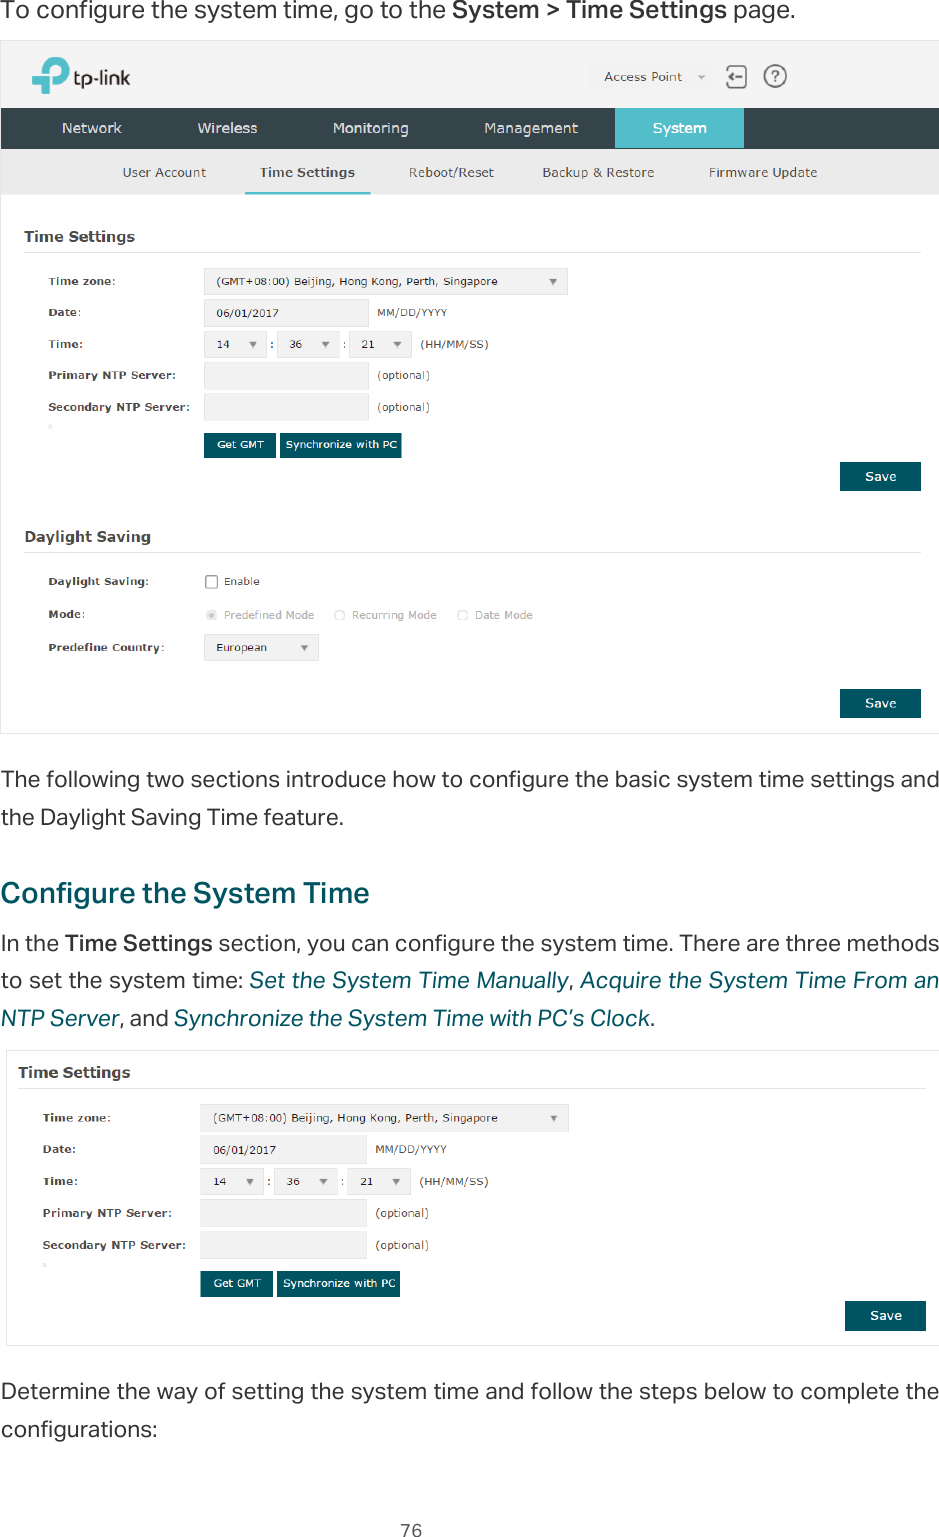  76To configure the system time, go to the System &gt; Time Settings page.The following two sections introduce how to configure the basic system time settings and the Daylight Saving Time feature.Configure the System TimeIn the Time Settings section, you can configure the system time. There are three methods to set the system time: Set the System Time Manually, Acquire the System Time From an NTP Server, and Synchronize the System Time with PC’s Clock.Determine the way of setting the system time and follow the steps below to complete the configurations: